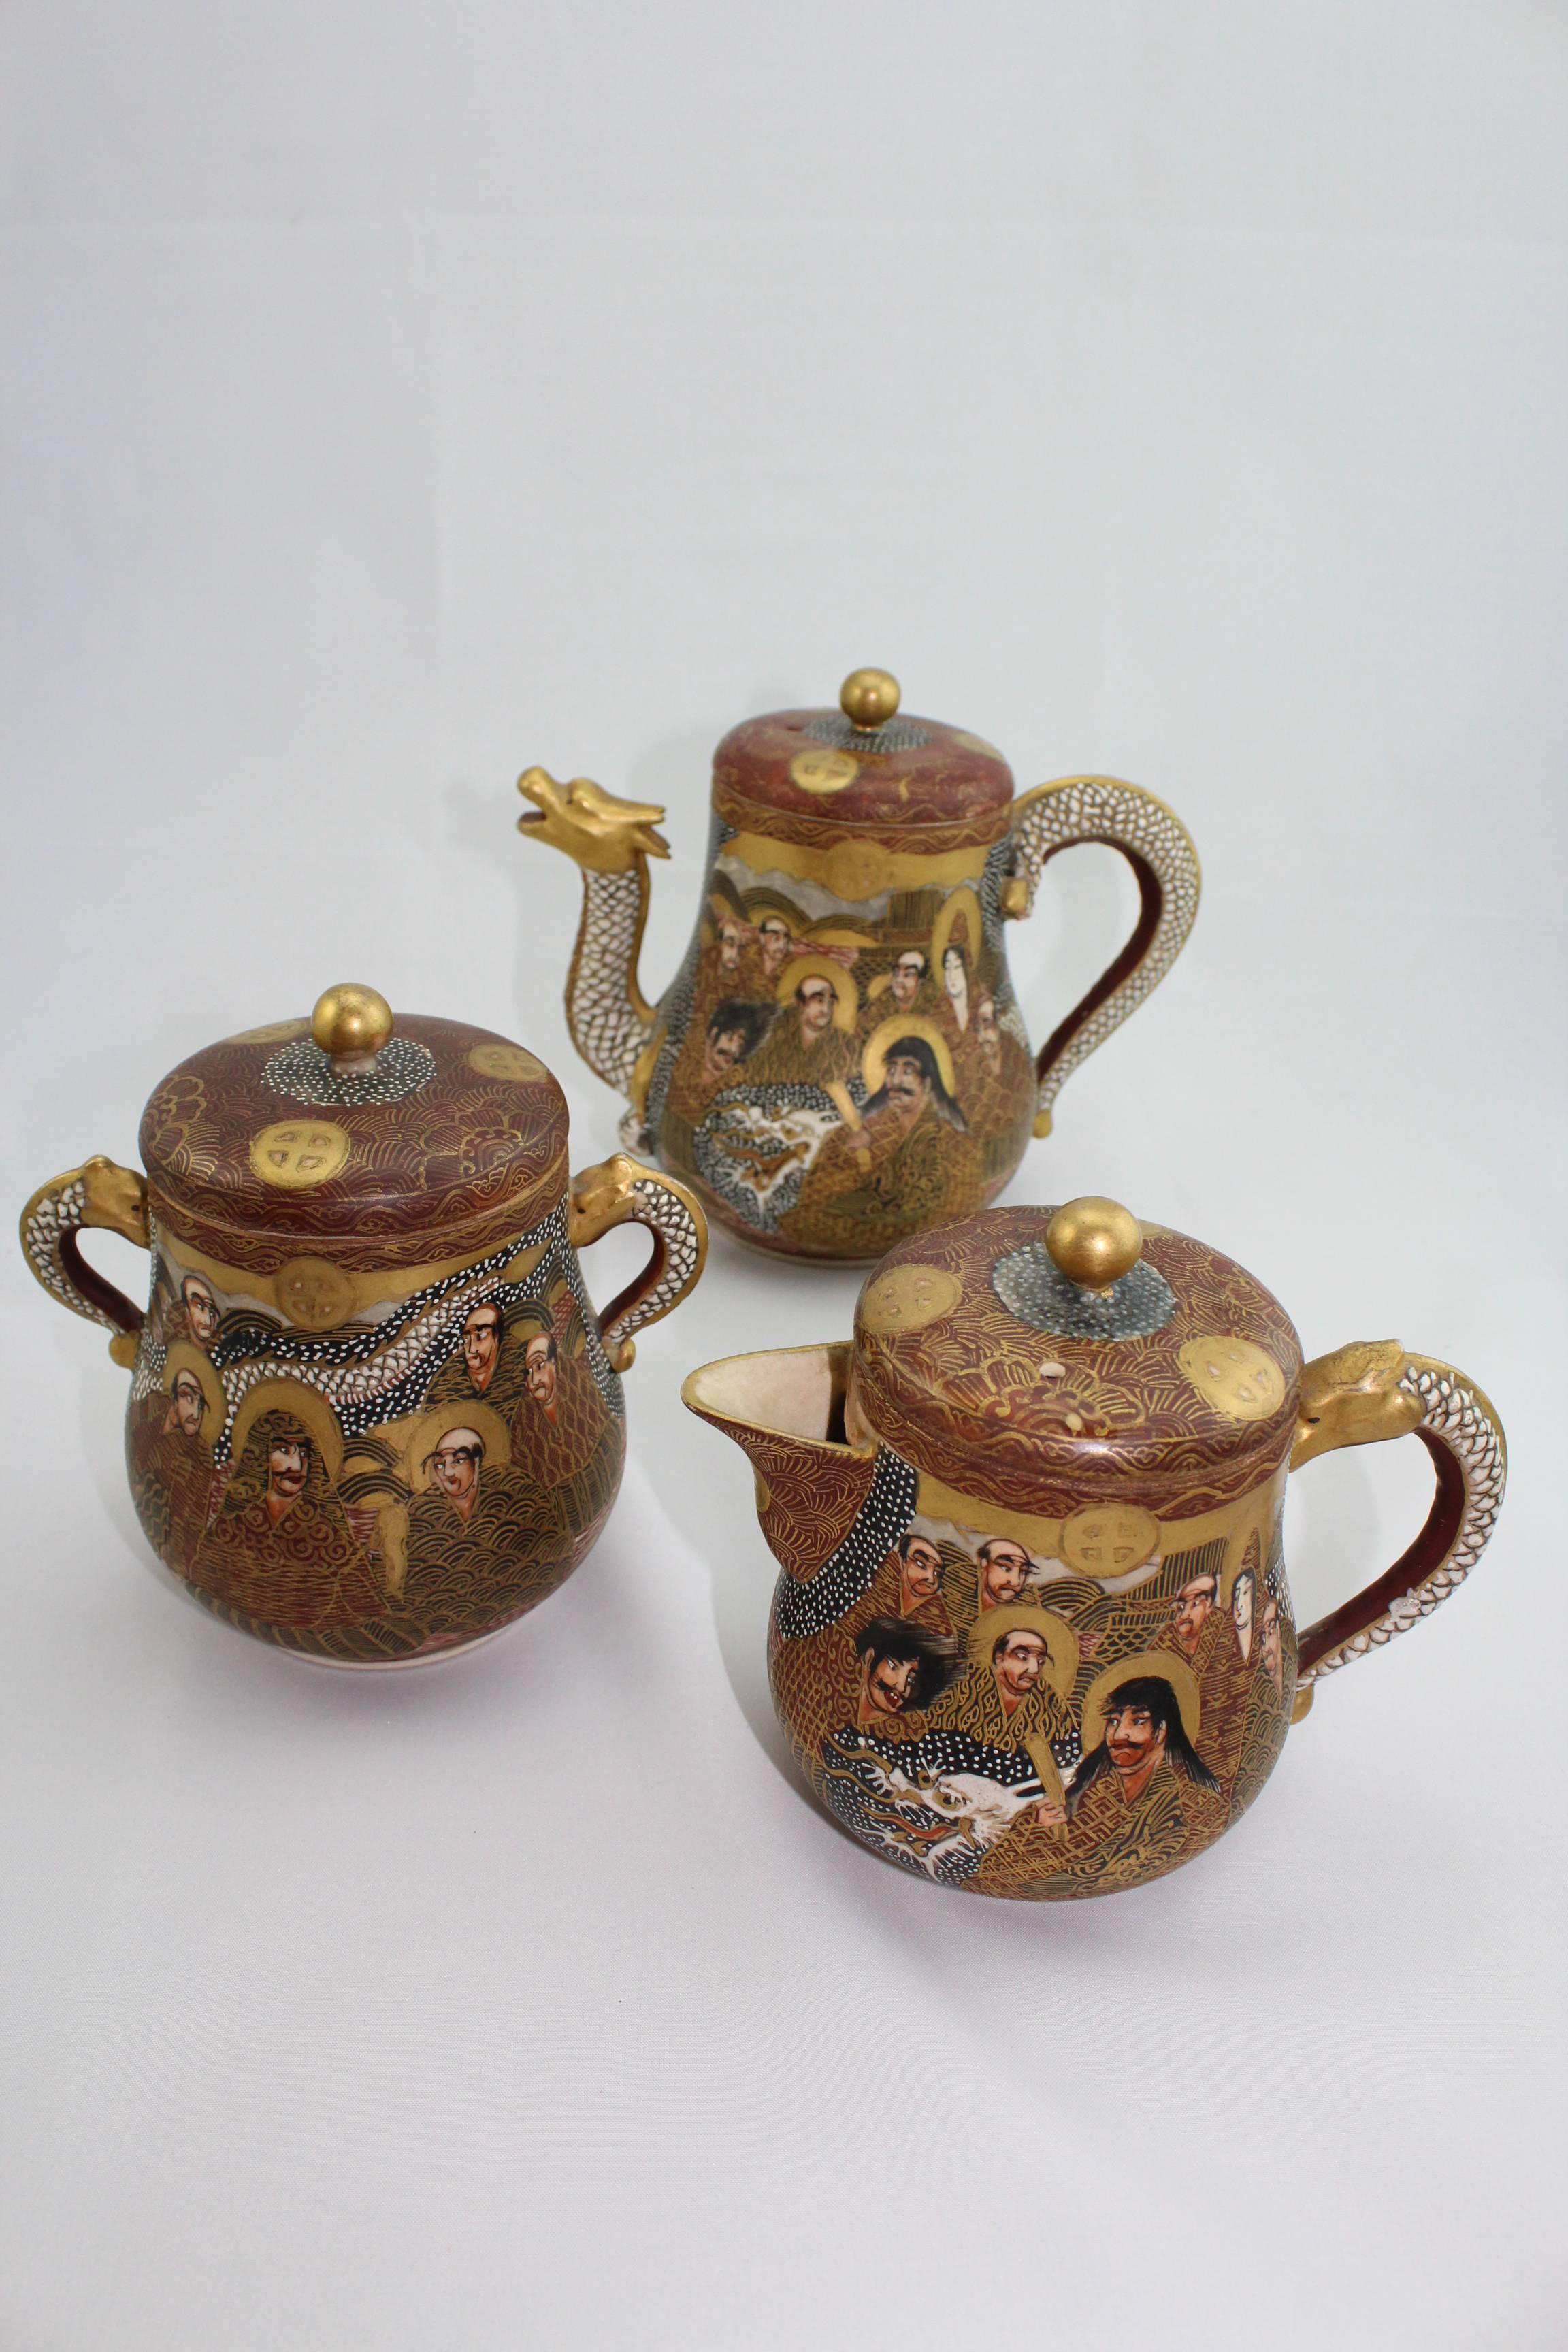 From the Richard (Dick) Bass estate.

Finely painted Japanese Satsuma porcelain dragon and immortals tea set from the Meiji period (1868-1912). The set consists of a teapot, sugar pot, milk pot, three lids, six cups and six saucers. 18